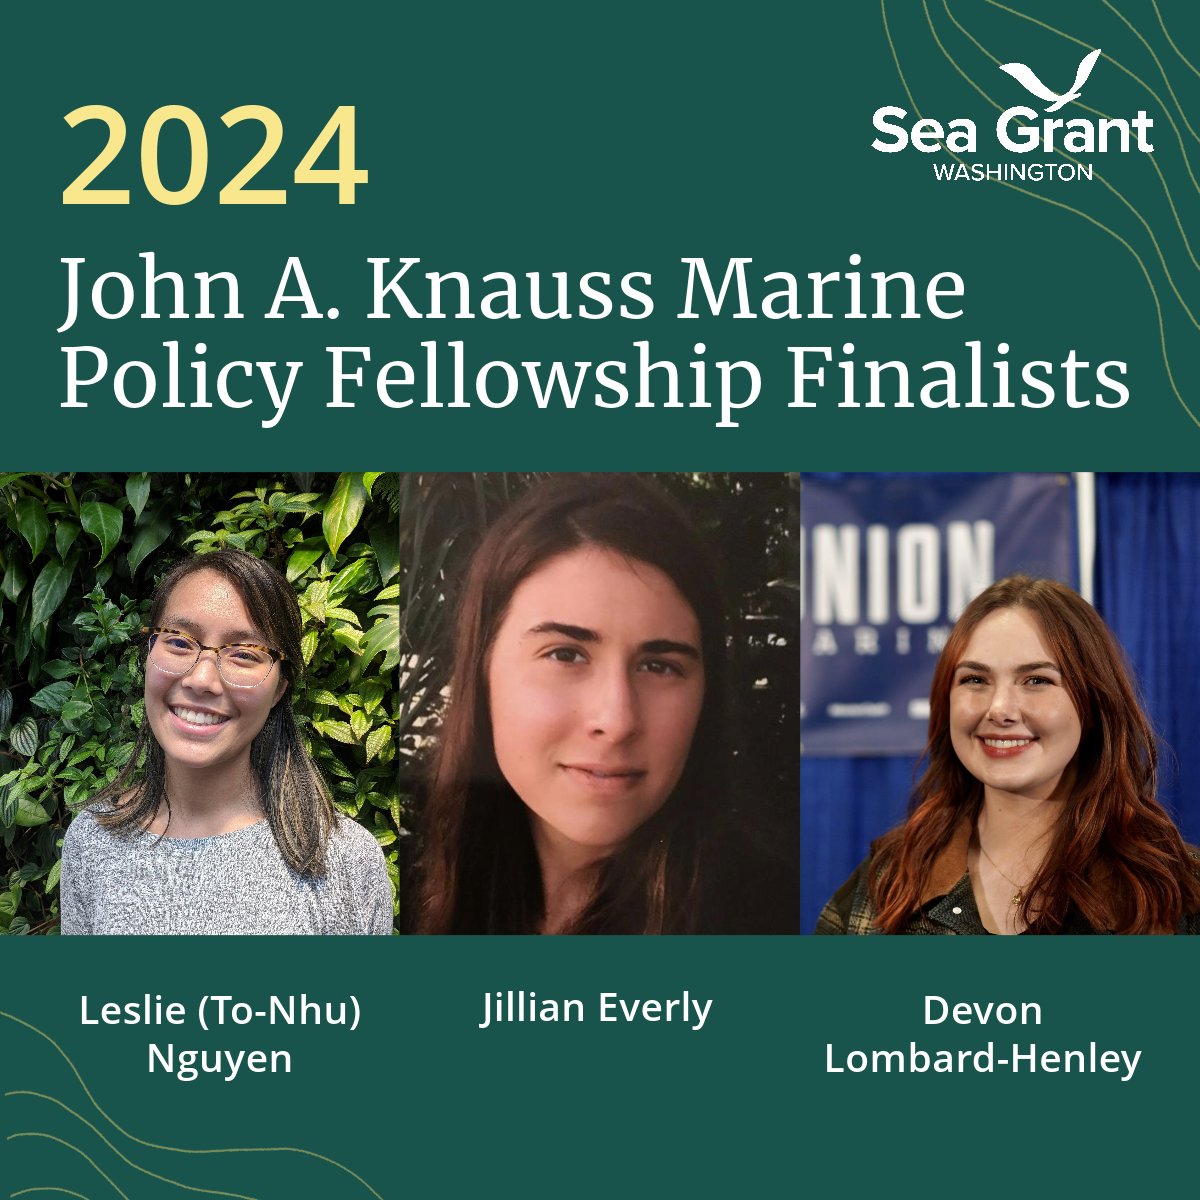 We are pleased to announce that three recent graduate students from universities in Washington and Idaho were selected as finalists for the 2024 class of the prestigious John A. Knauss Marine Policy Fellowship Program! Get to know this year's fellows at: bit.ly/3LNX6Mx